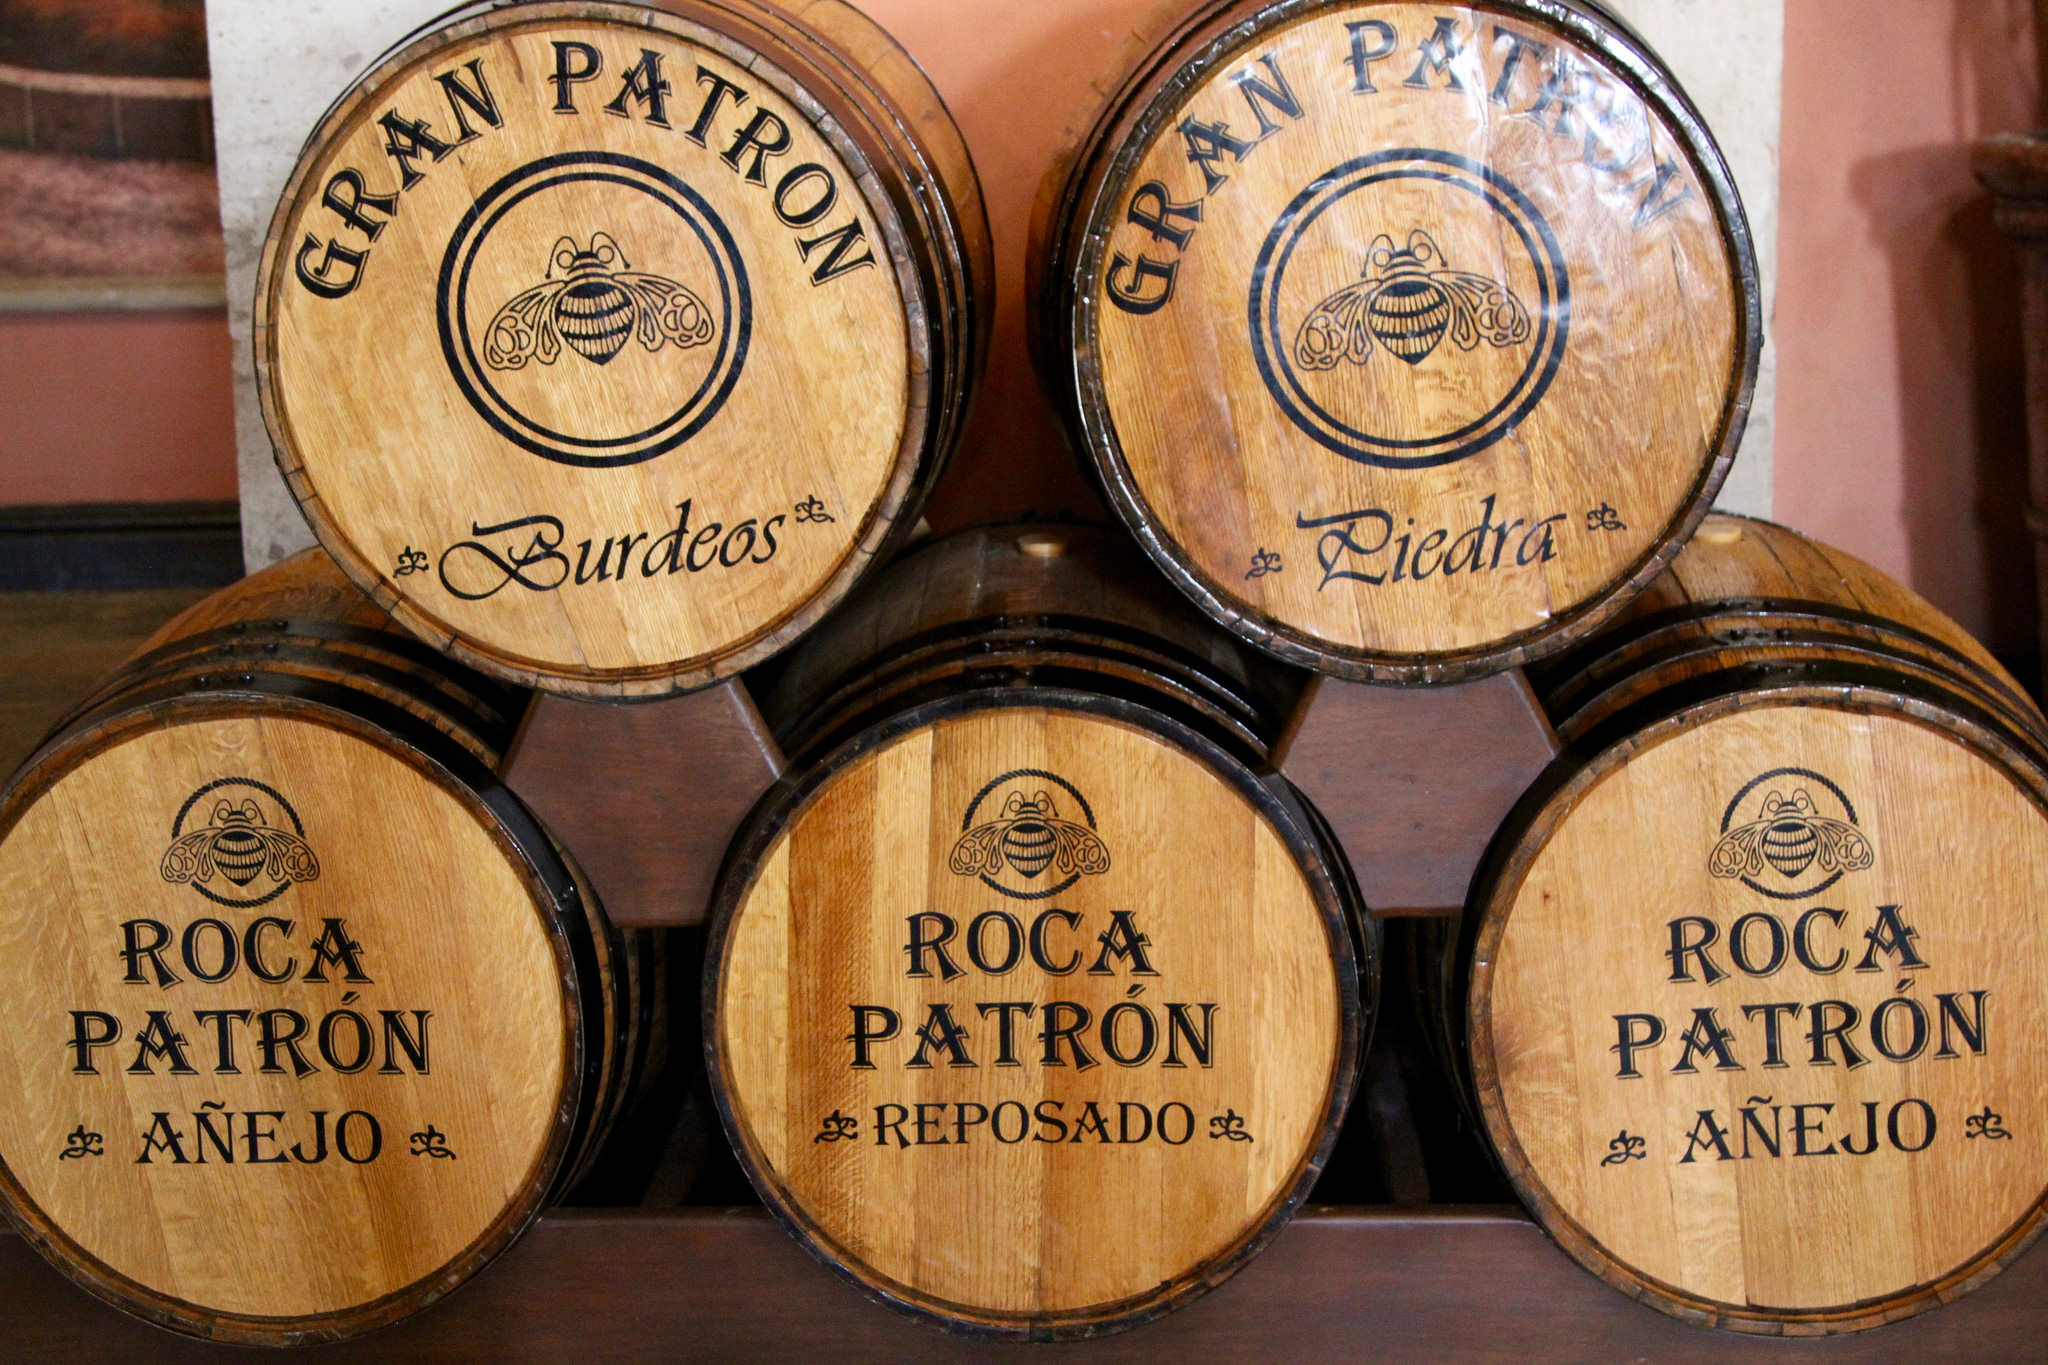 Aging tequilas at Patron